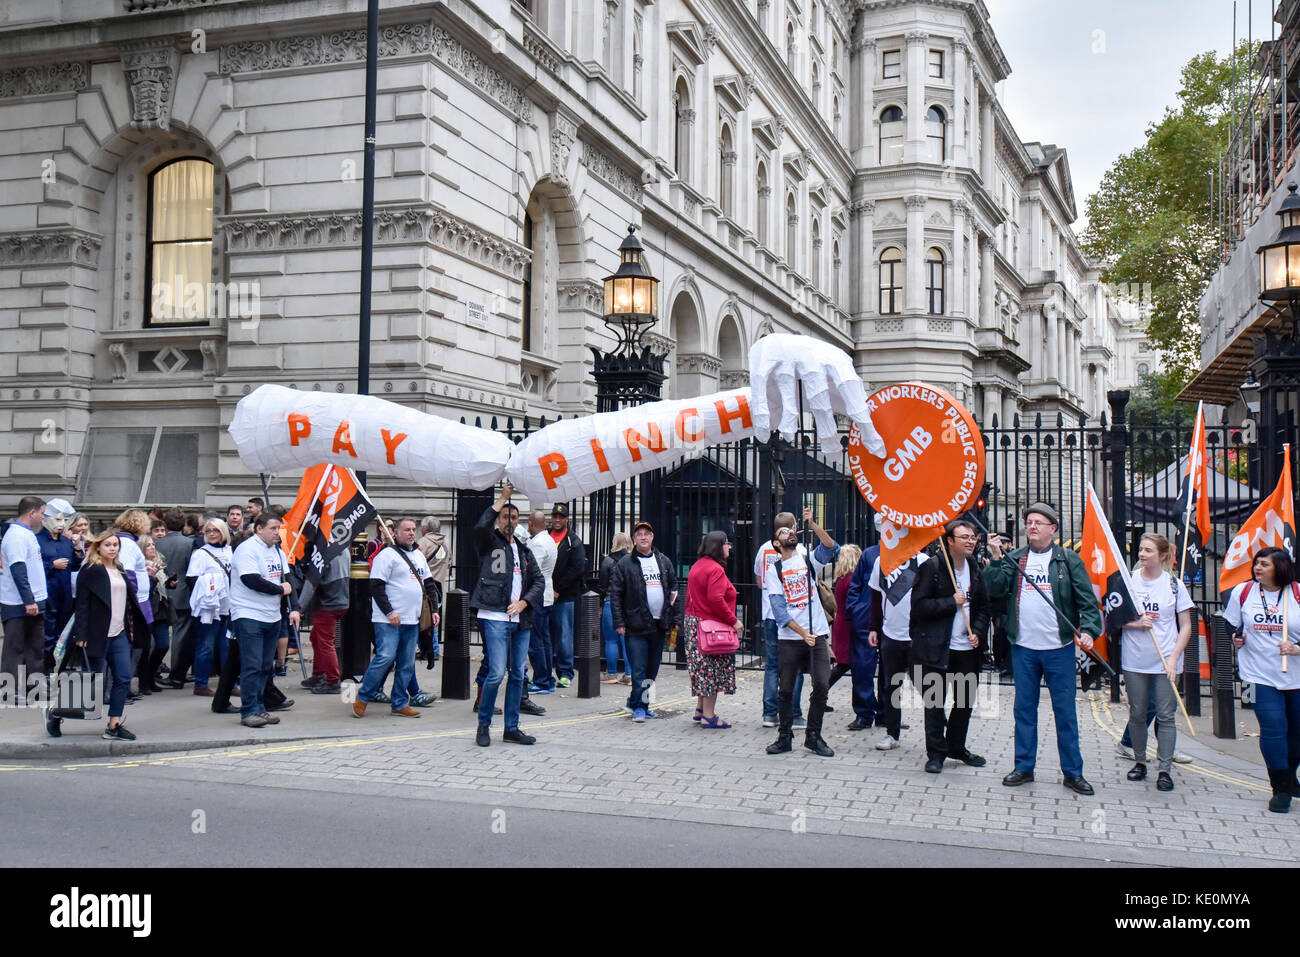 London, UK. 17th Oct, 2017. Public sector workers, several wearing masks depicting Theresa May, Prime Minister, as a 'MayBot' outside the Downing Street ahead of a rally in Parliament Square against the cap on public sector workers' pay. Credit: Stephen Chung/Alamy Live News Stock Photo